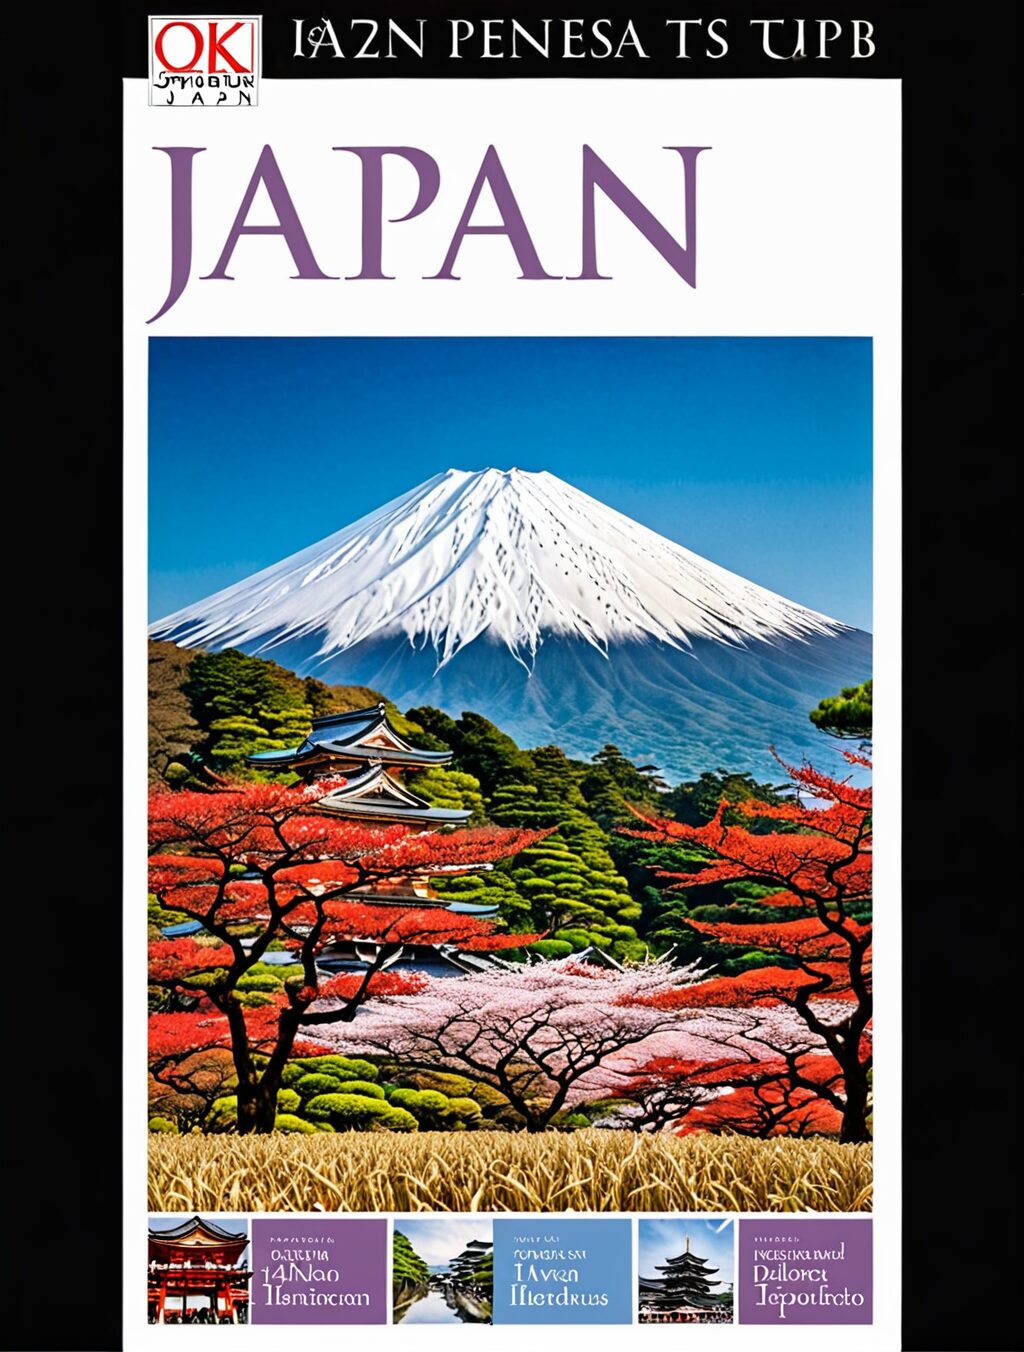 travel books about japan